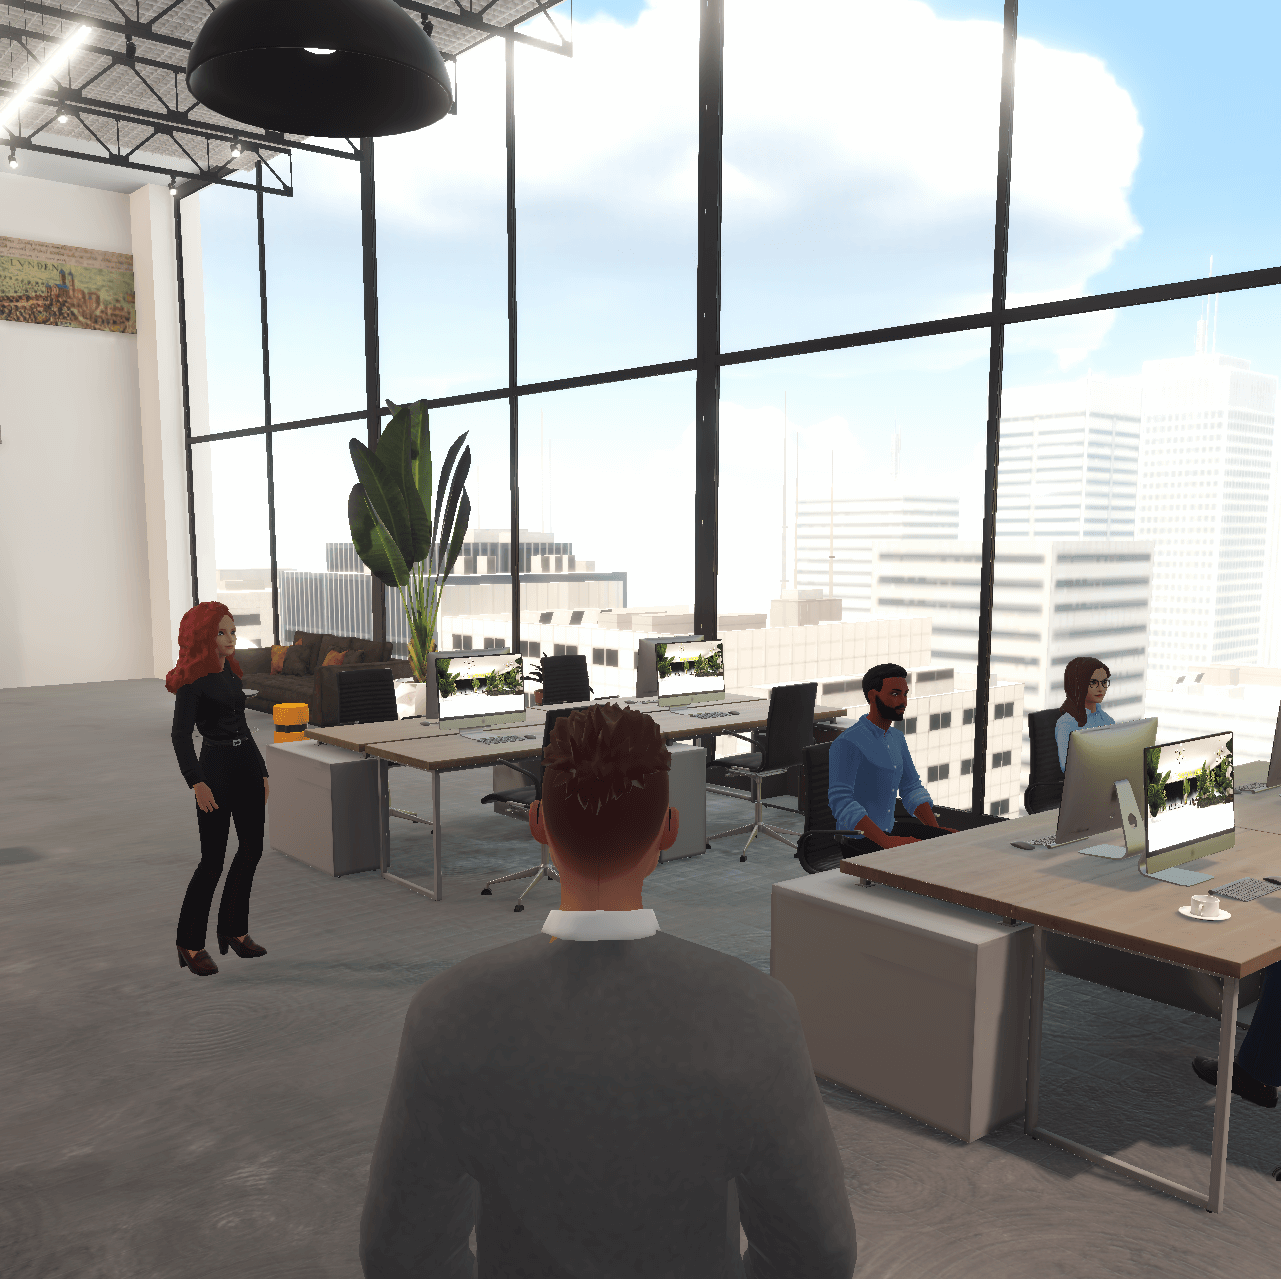 Online co-working space or virtual office. Avatars working in groups in the ReSocialize metaverse meeting platform. Some avatars are sitting at desks with computers, others are standing and having conversations. The environment is light and inspiring environment, floor-to-ceiling windows at the far wall, and several desks, meeting tables, and couch areas ready for online networking events and remote work. perfect digital nomad tool to empower networking in when working alone or remote